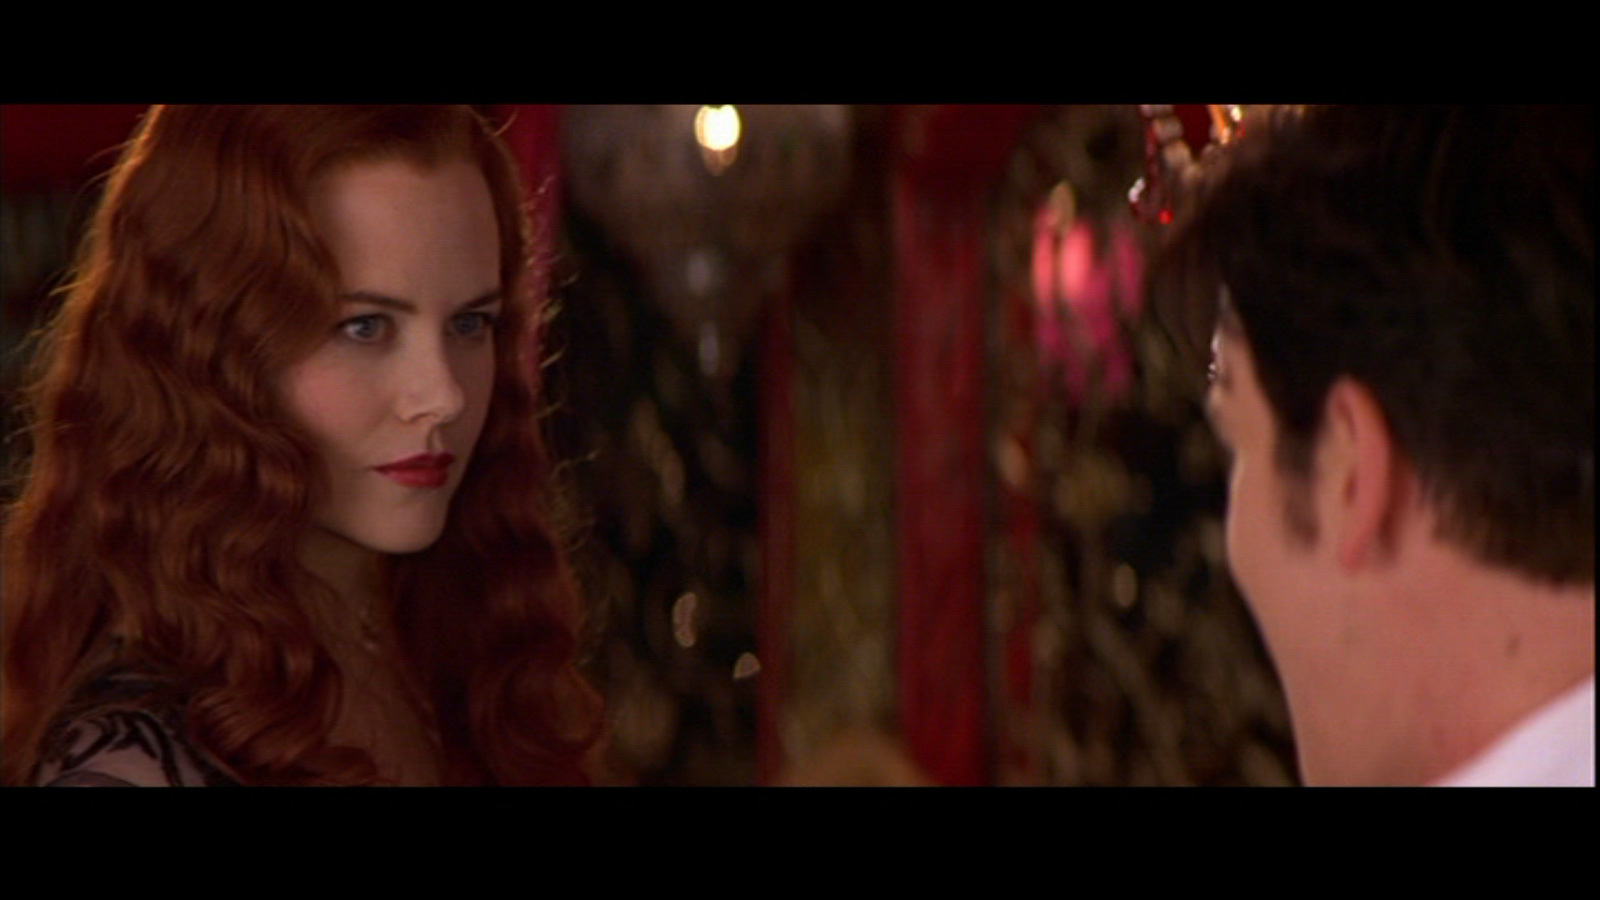 Satine // Moulin Rouge - Female Movie Characters Image (22958779) - Fanpop